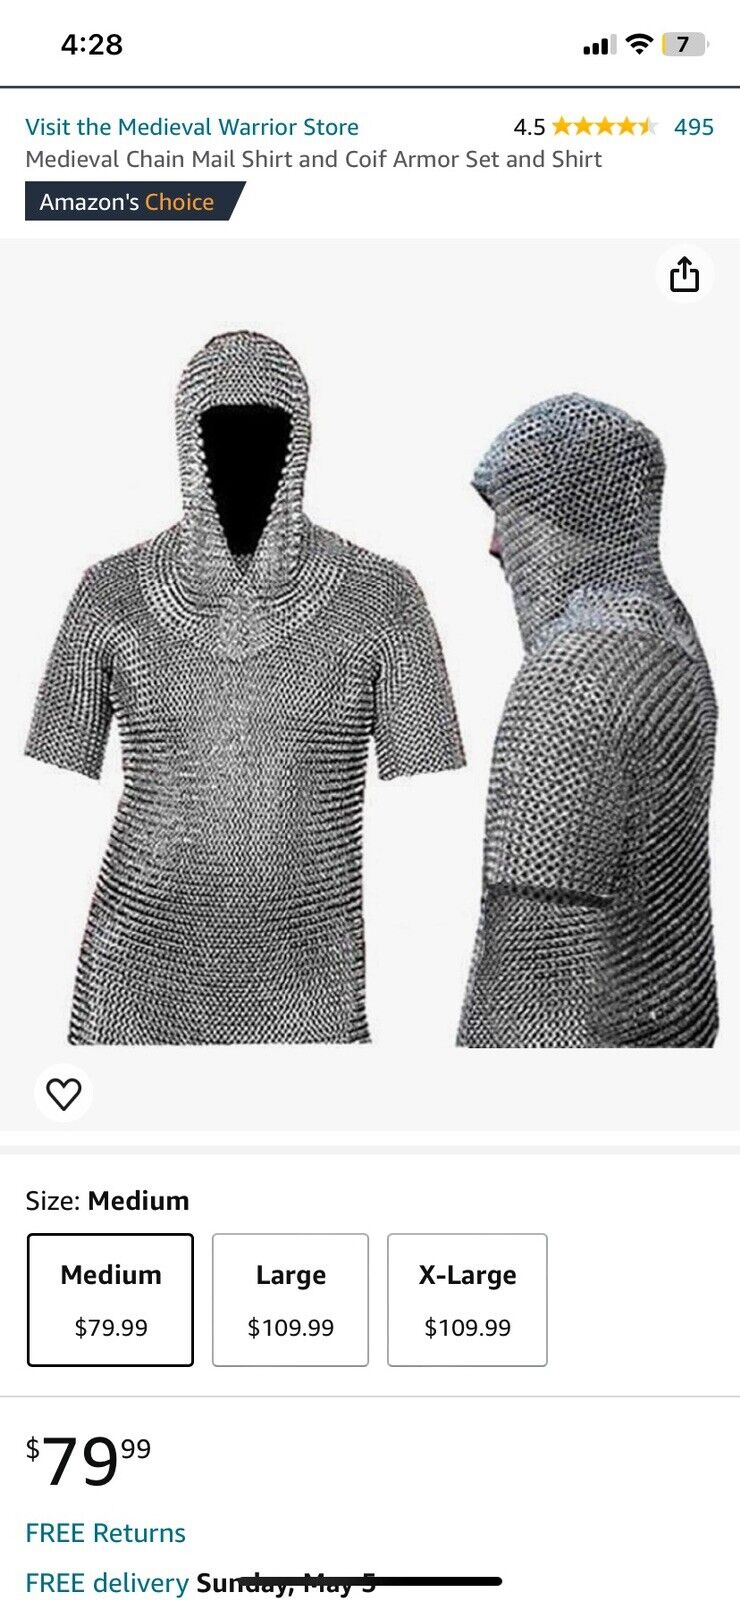 Medieval Heavy Stainless Steel Chainmail Armor Shirt Sz Med & Coif Set V Faced